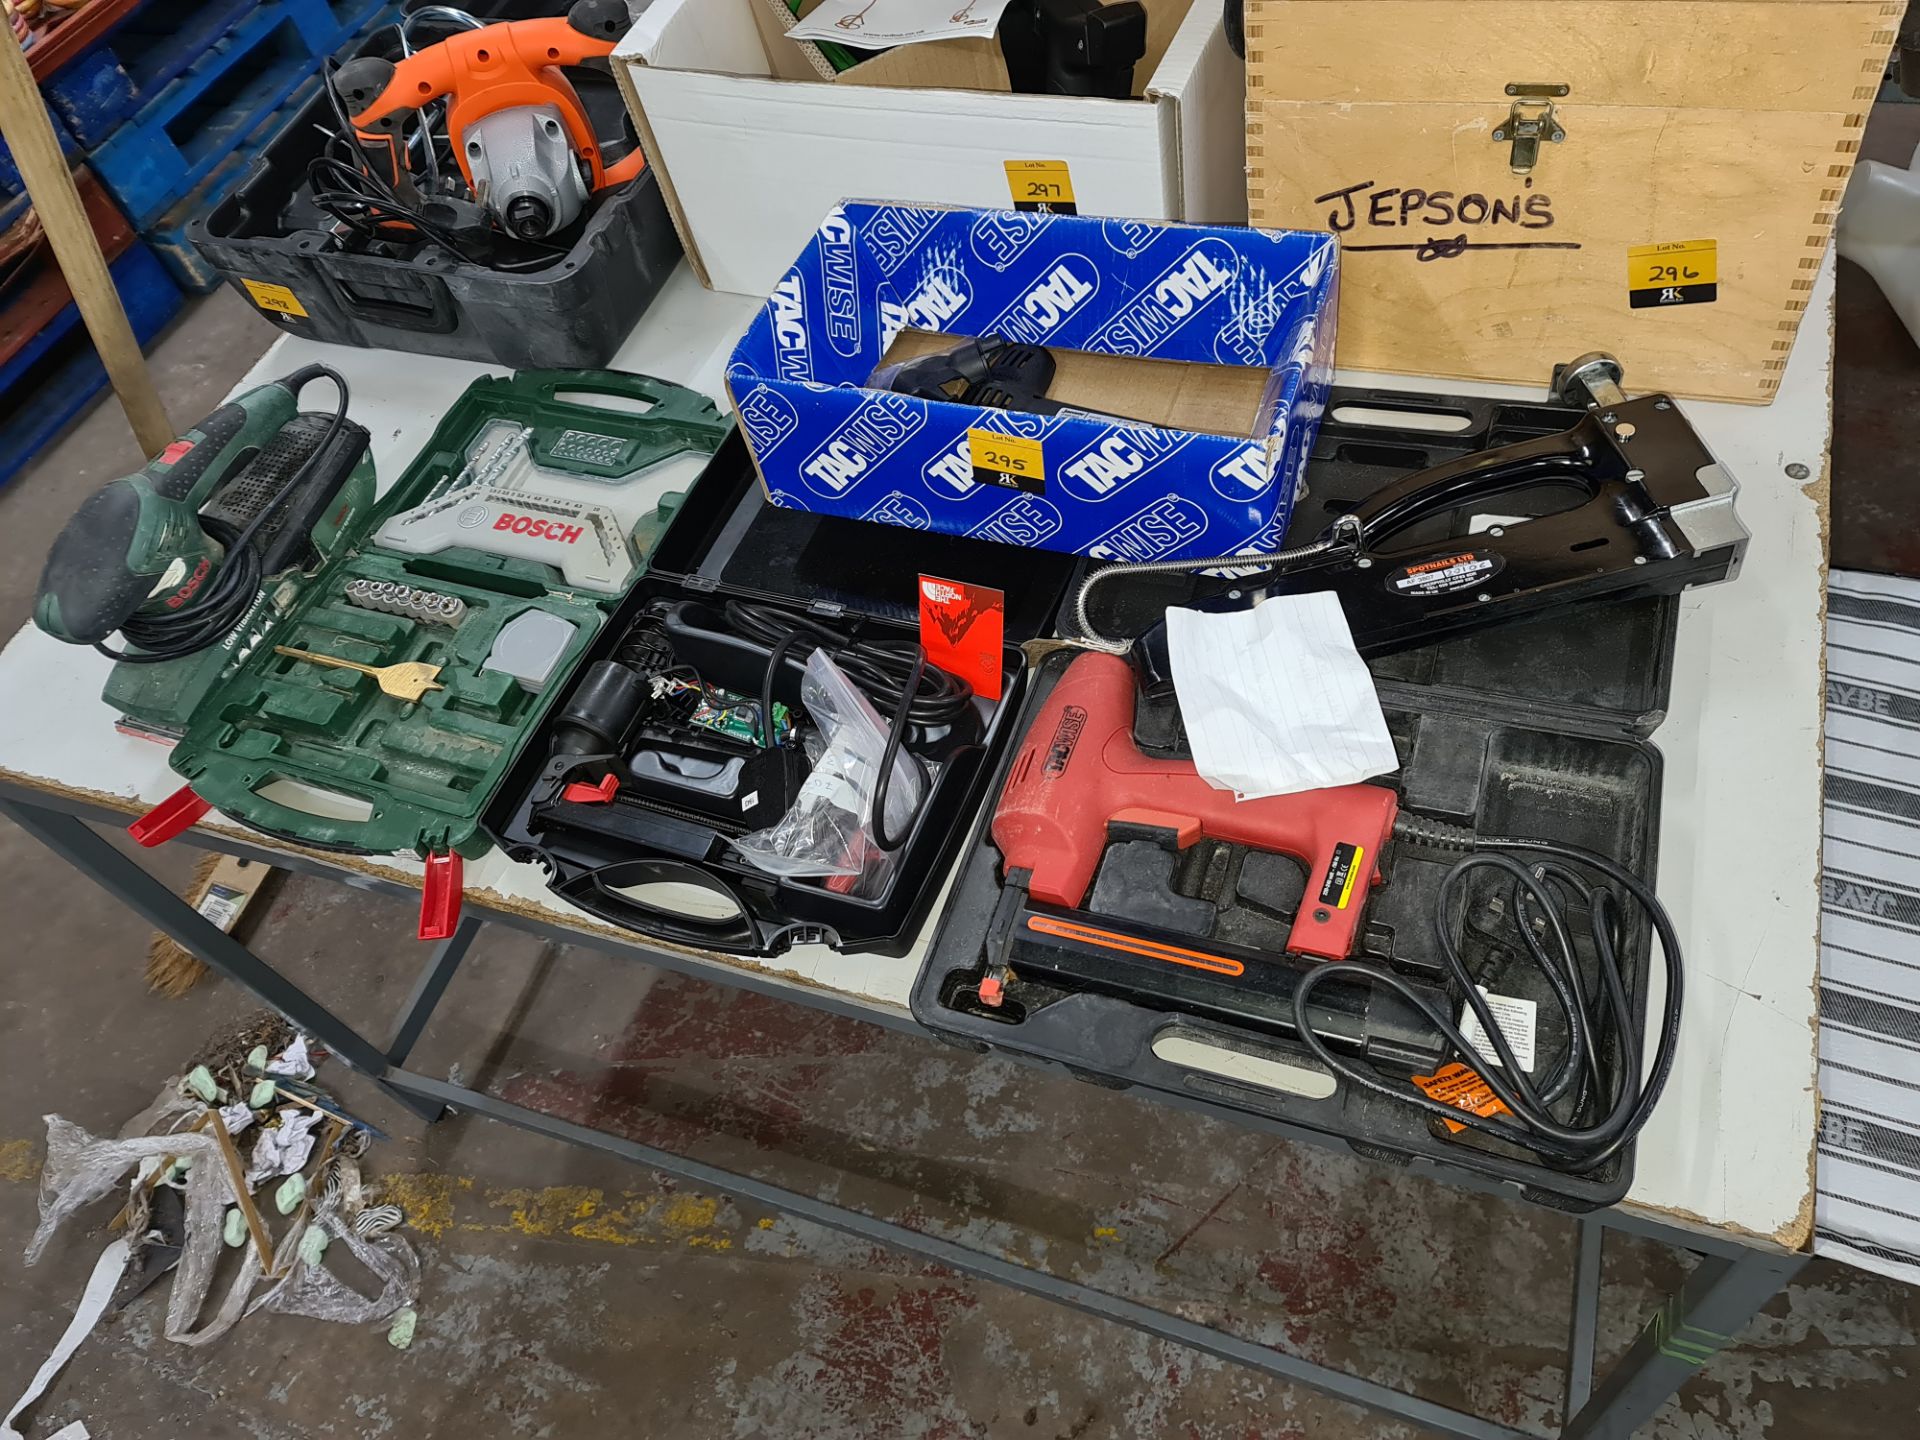 Quantity of assorted ex-display & used tools/accessoriesLots 31 - 328 comprise the total assets of a